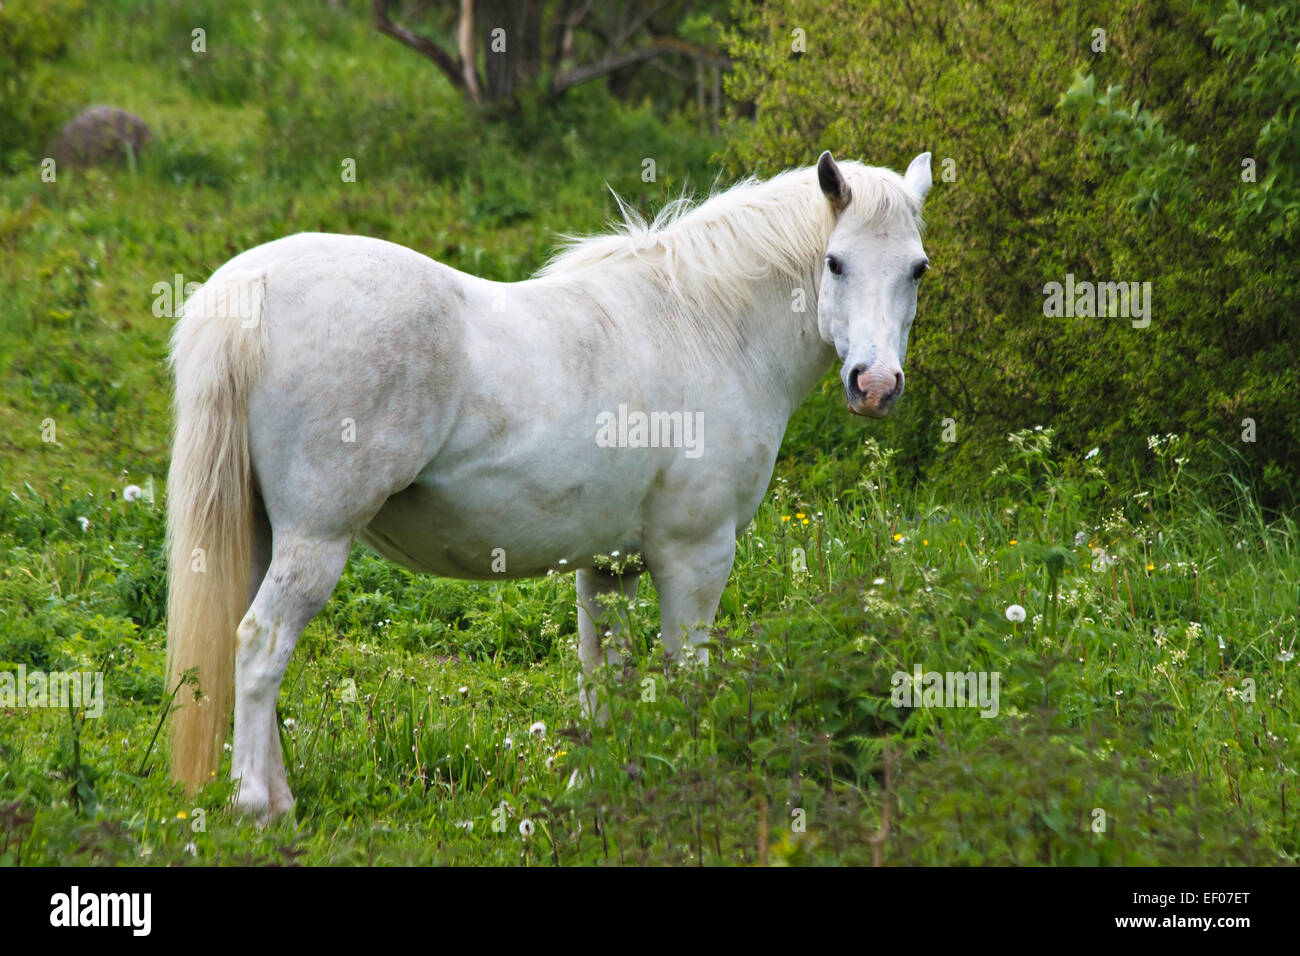 A white horse on a meadow. Stock Photo